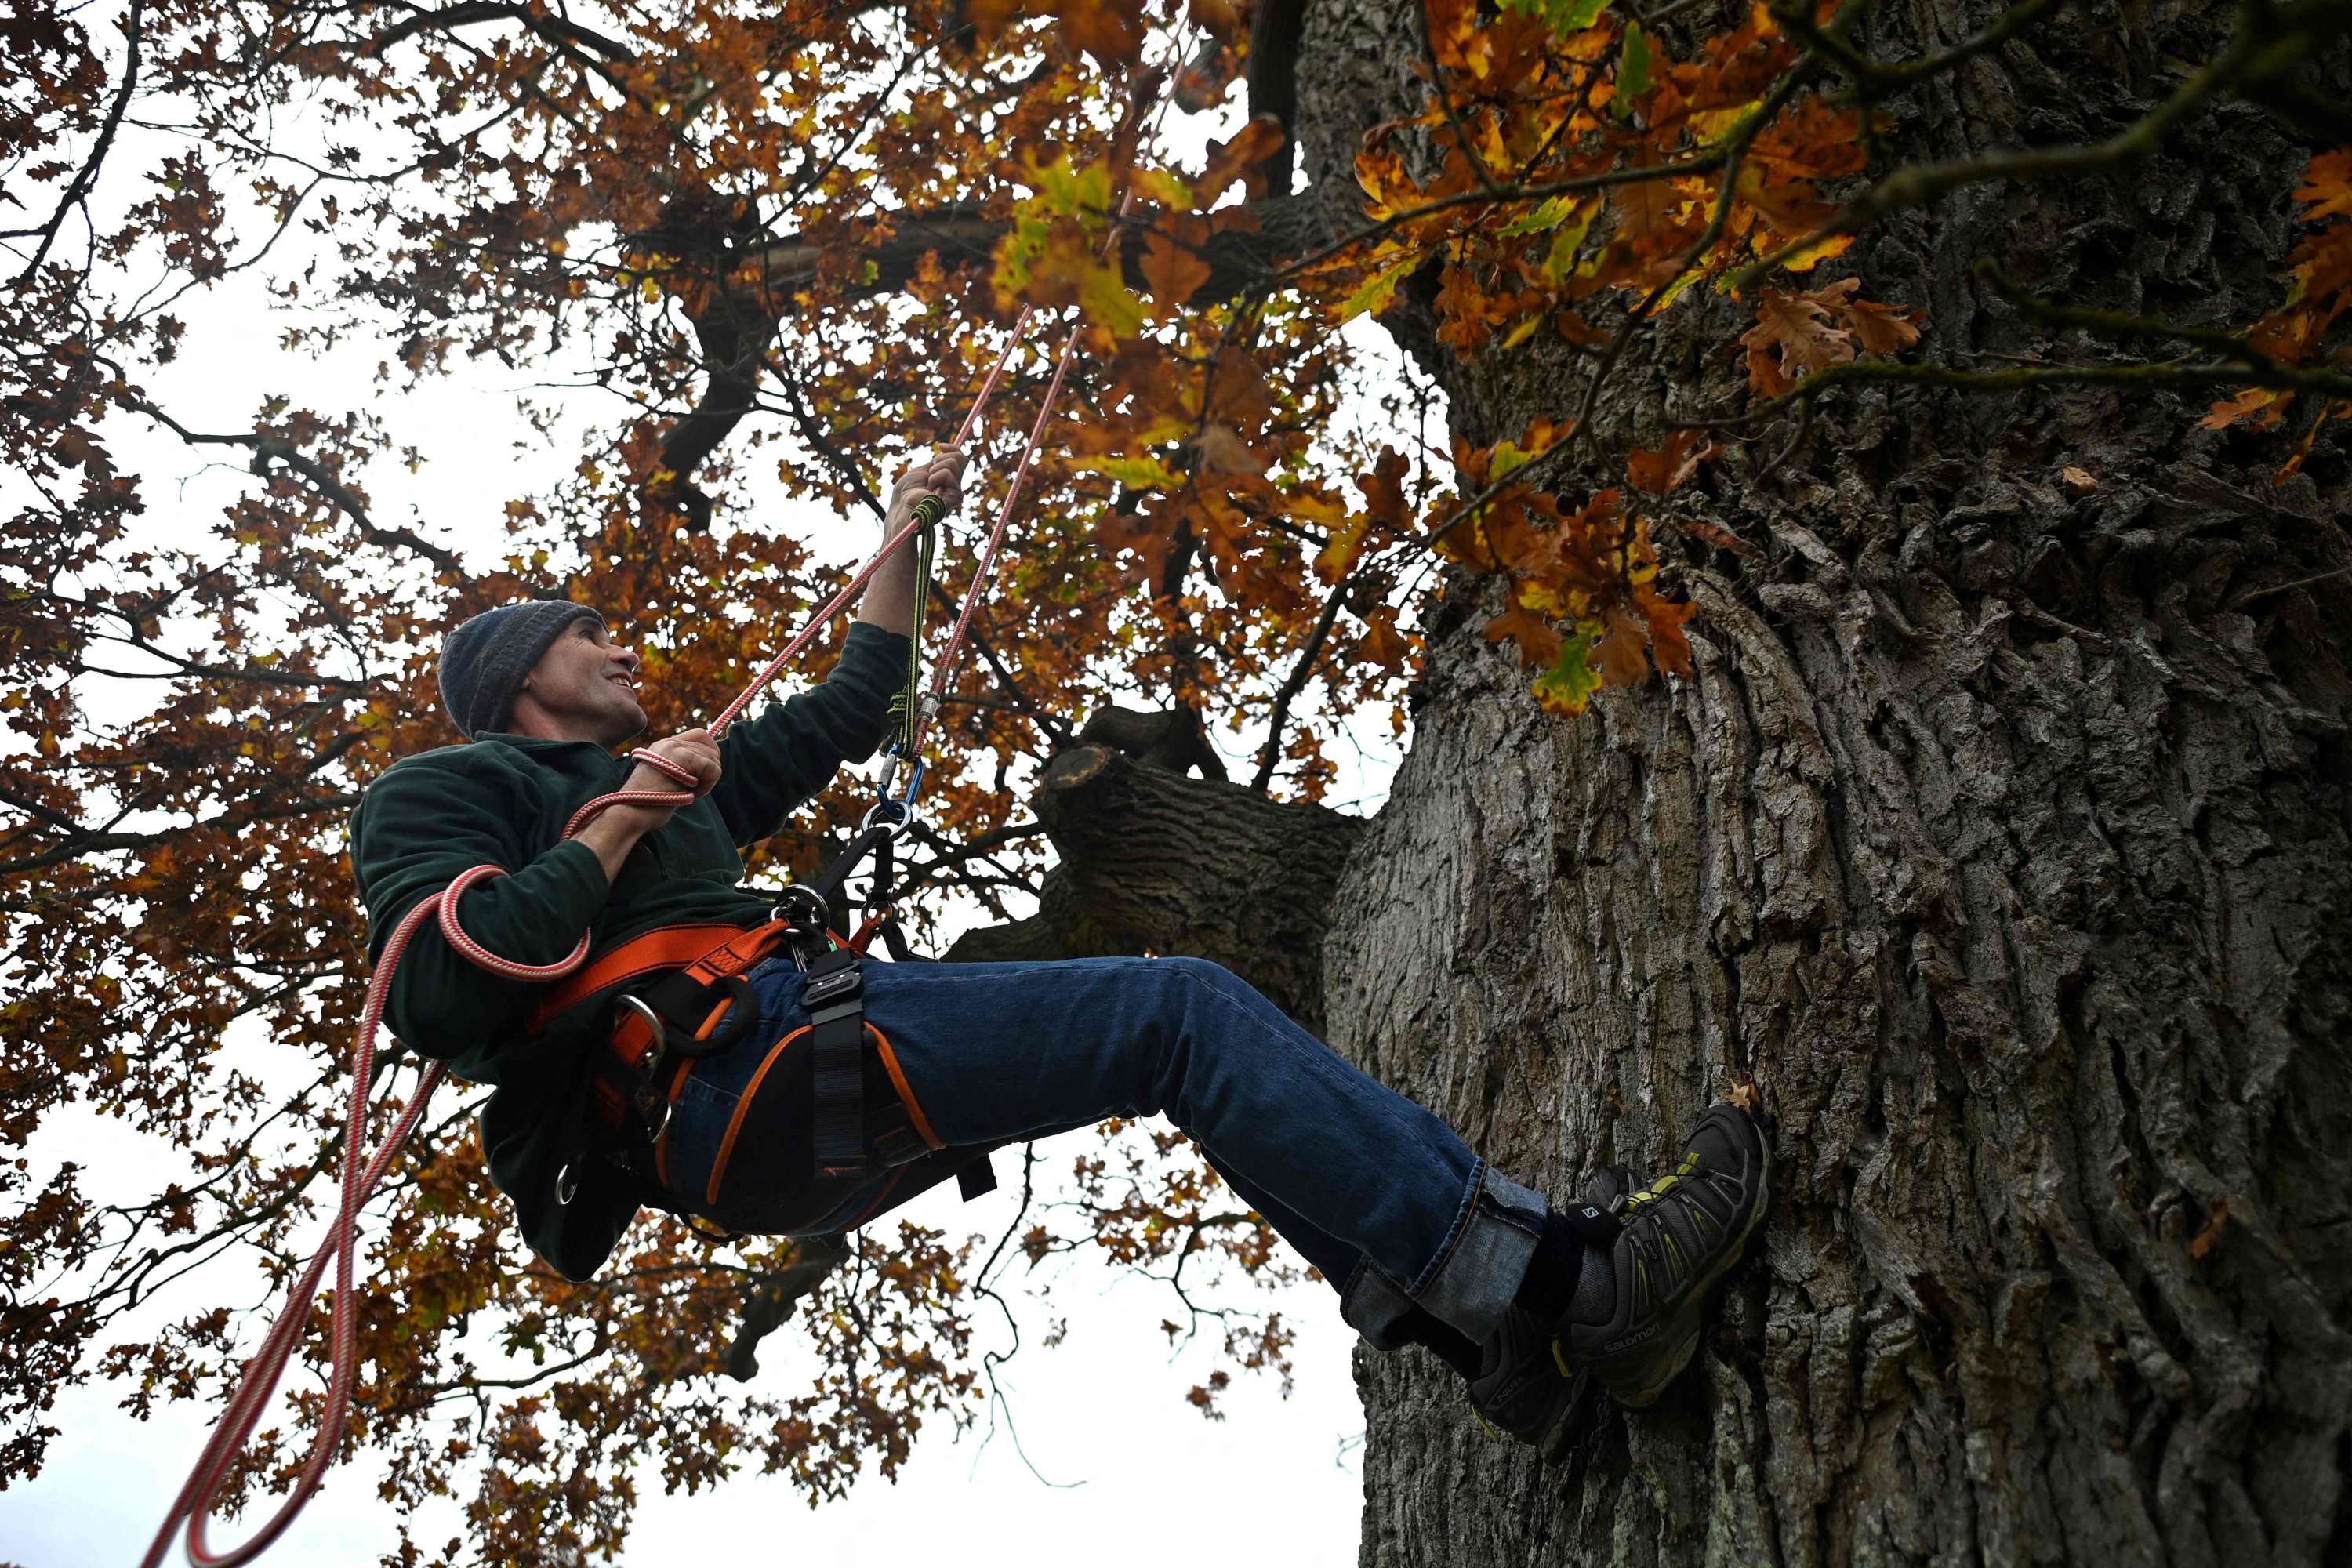 Bee conservationist Filipe Salbany climbs an oak tree to survey a honeybee colony in the High Park on the Blenheim Estate in Oxfordshire, U.K., Nov. 20, 2021. (AFP Photo)